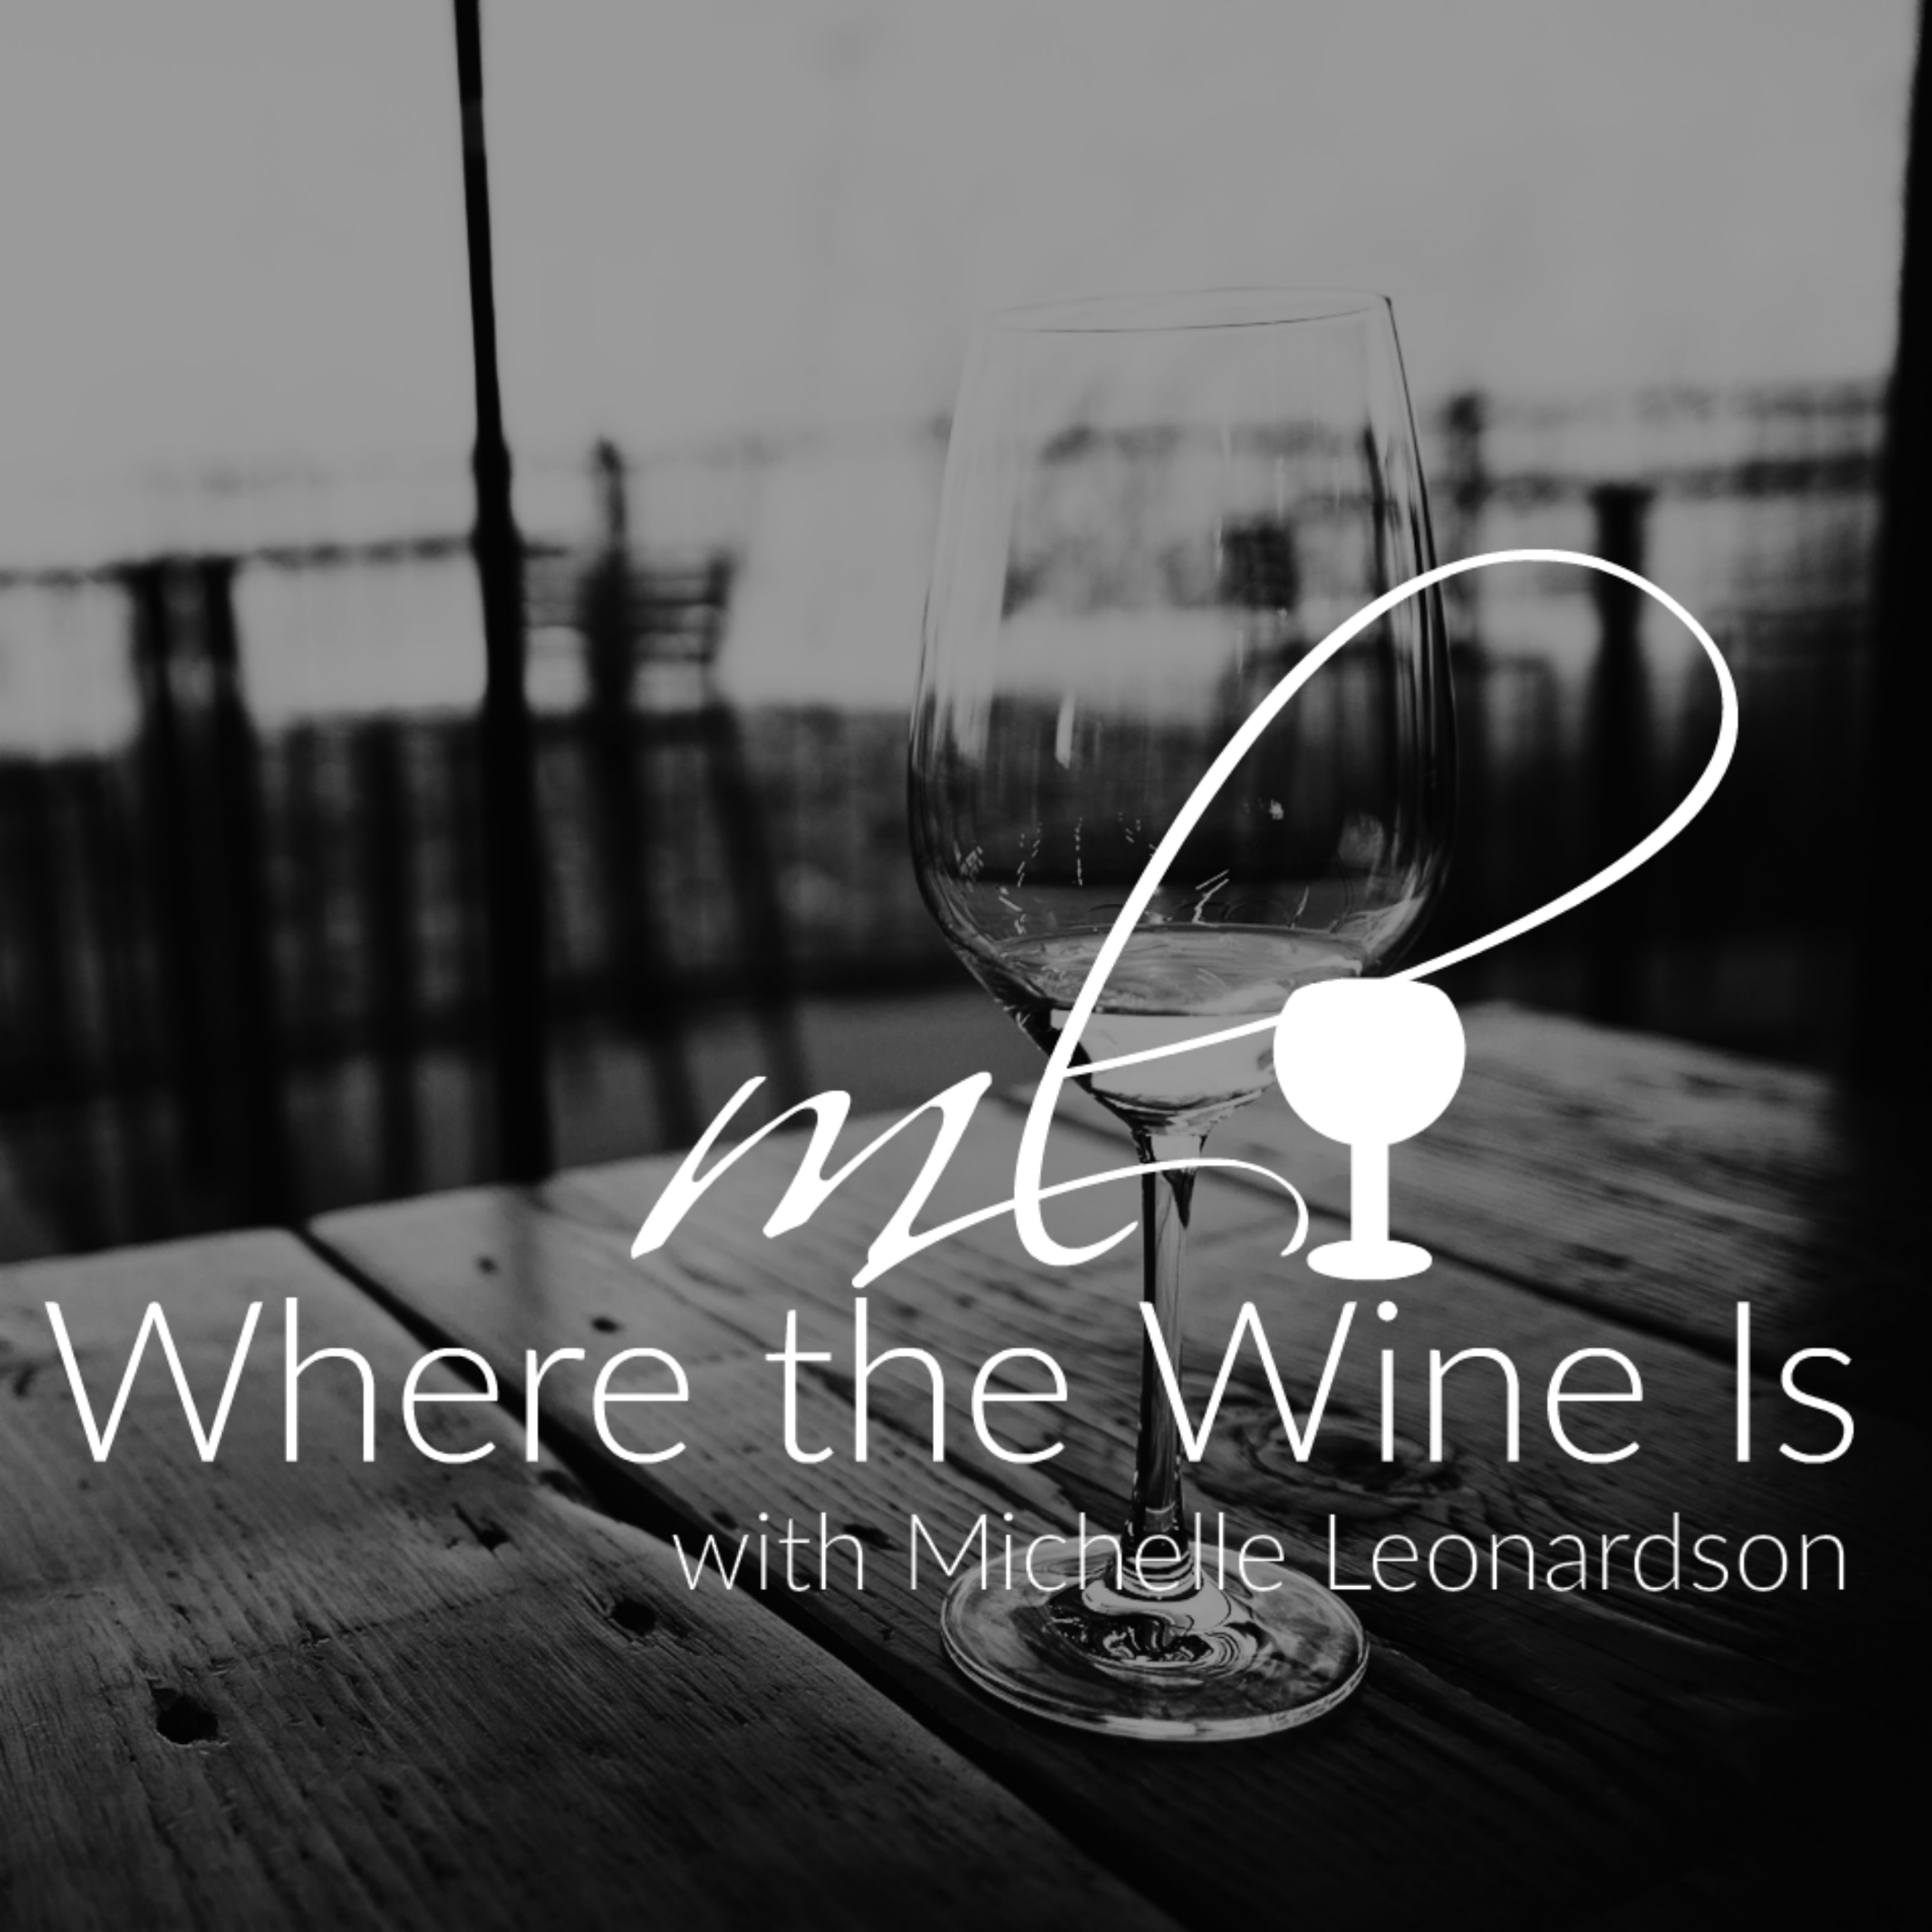 Where the Wine Is with Michelle Leonardson